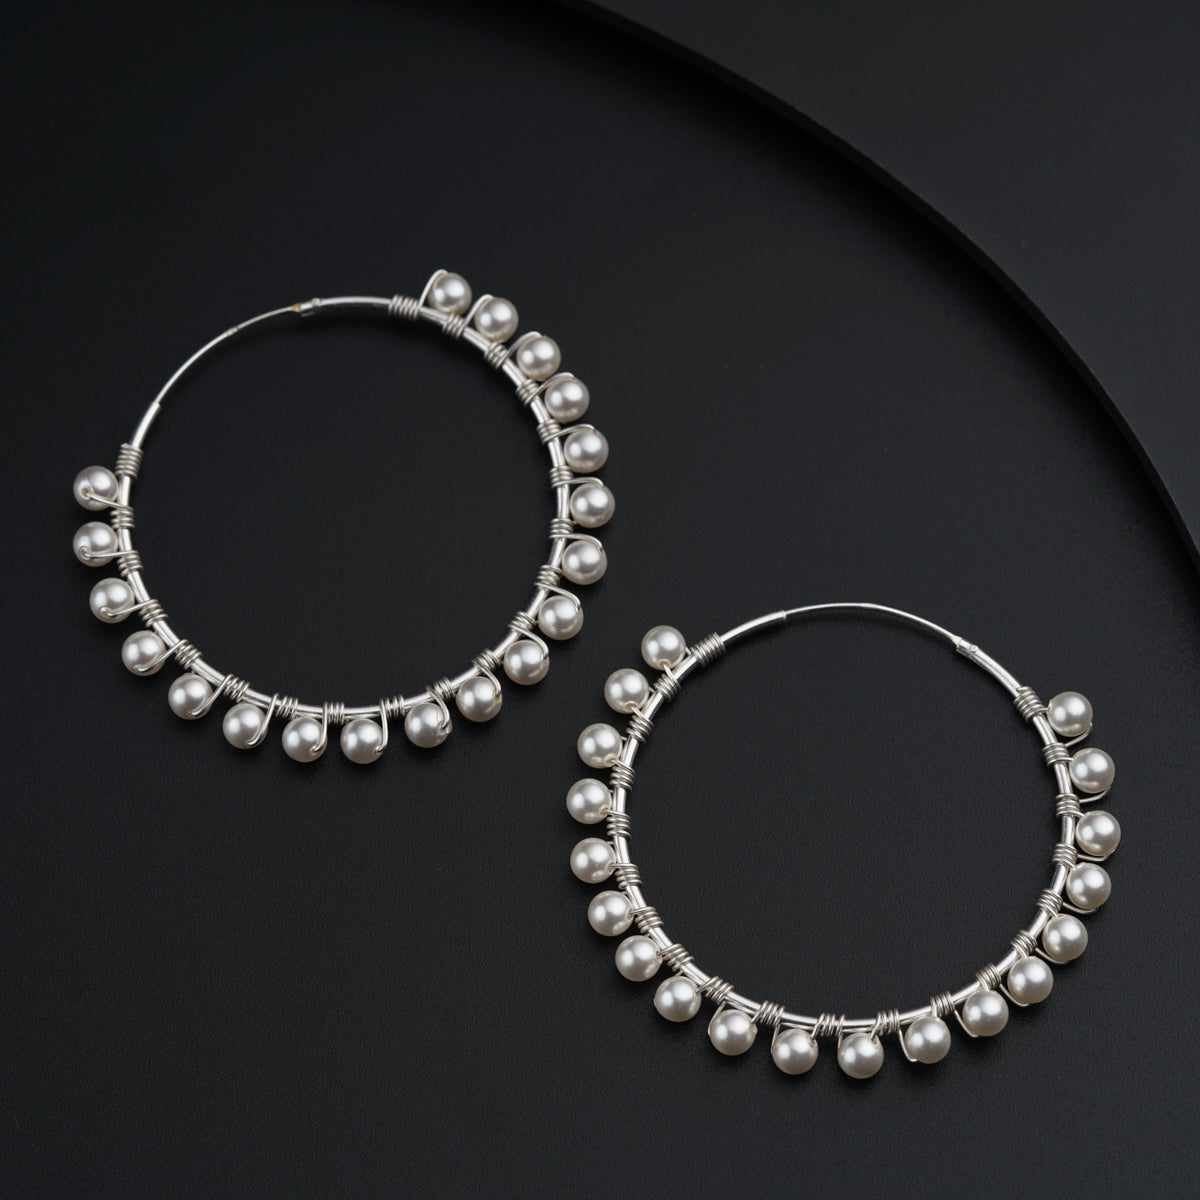 a pair of hoop earrings with pearls on a black background